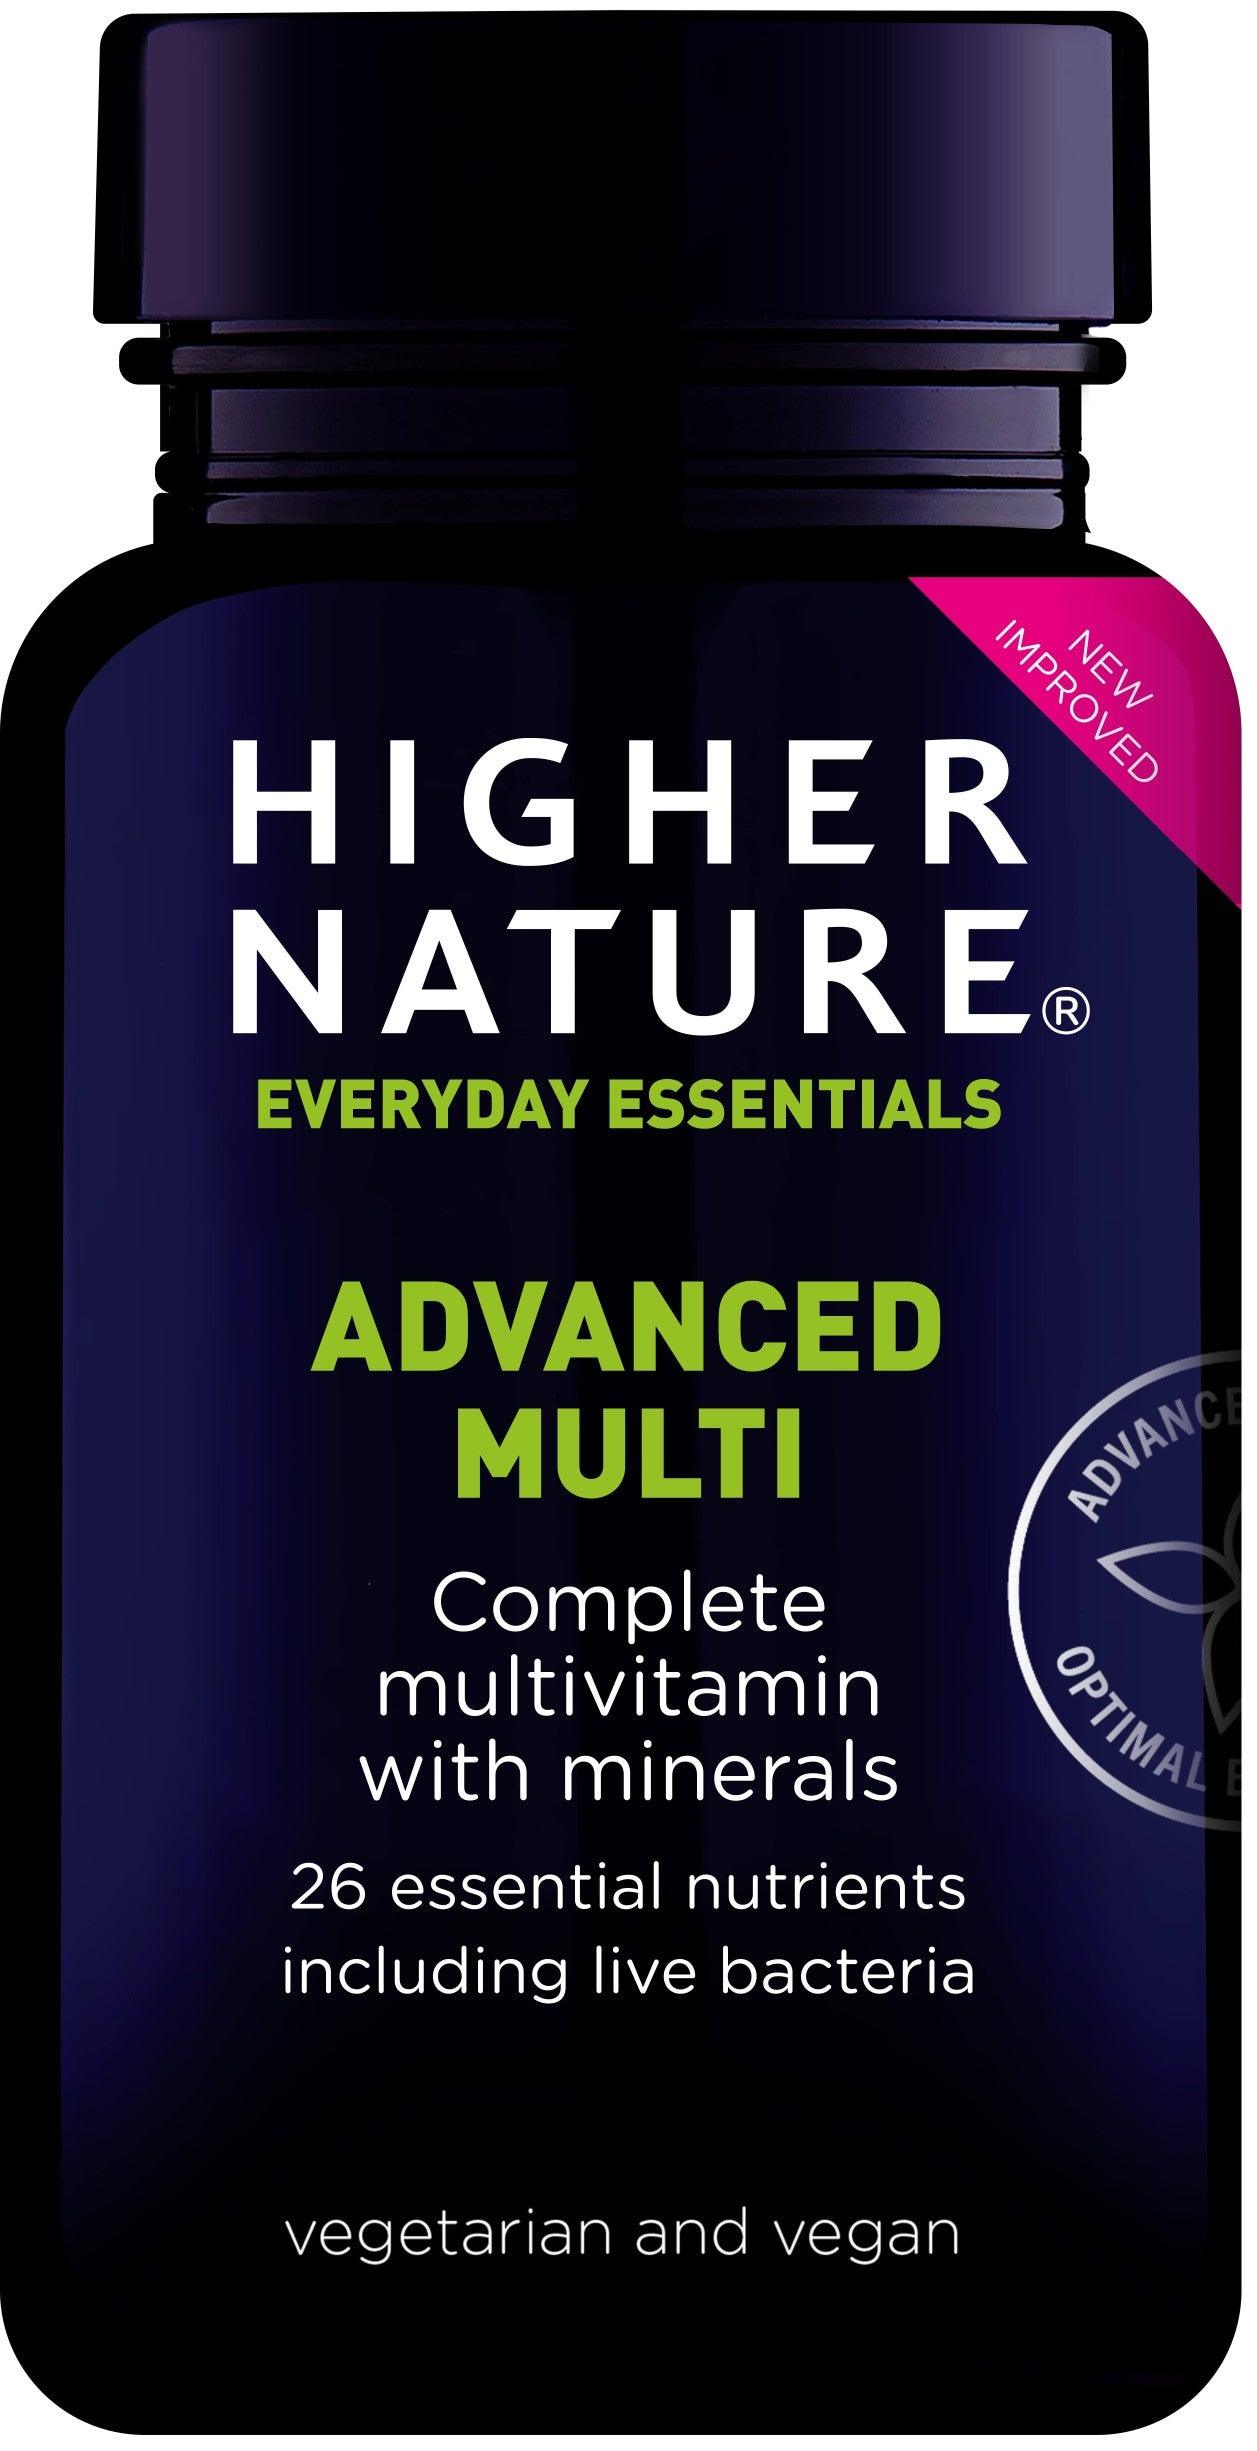 Higher Nature Advanced Multi (Formerly Advanced Nutrition Complex) 30's - Approved Vitamins